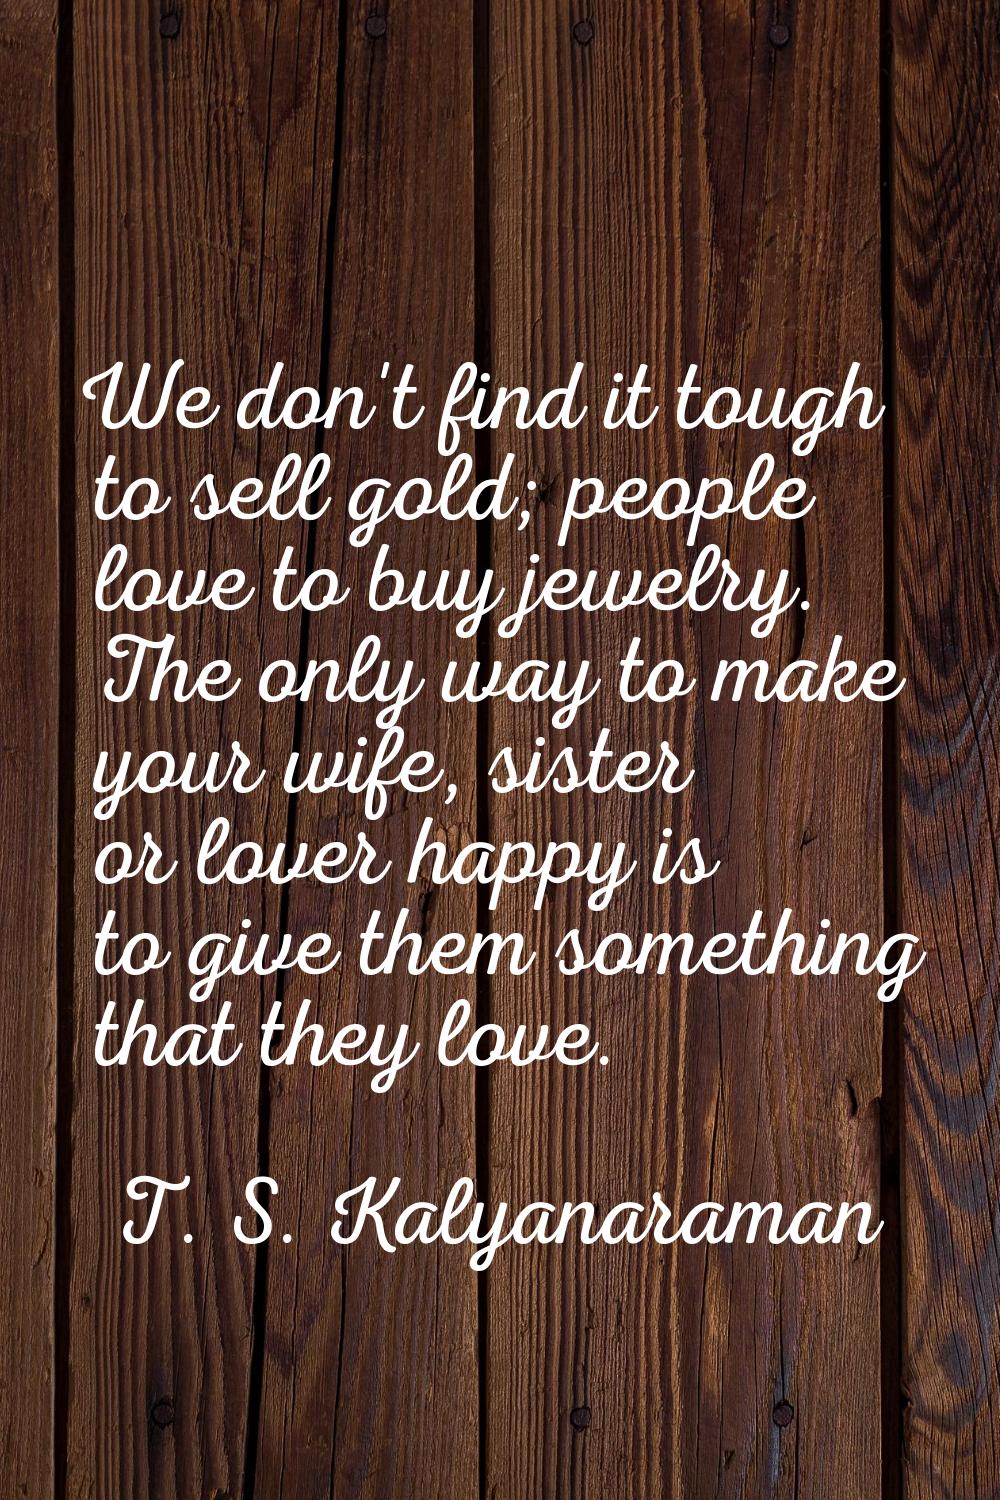 We don't find it tough to sell gold; people love to buy jewelry. The only way to make your wife, si